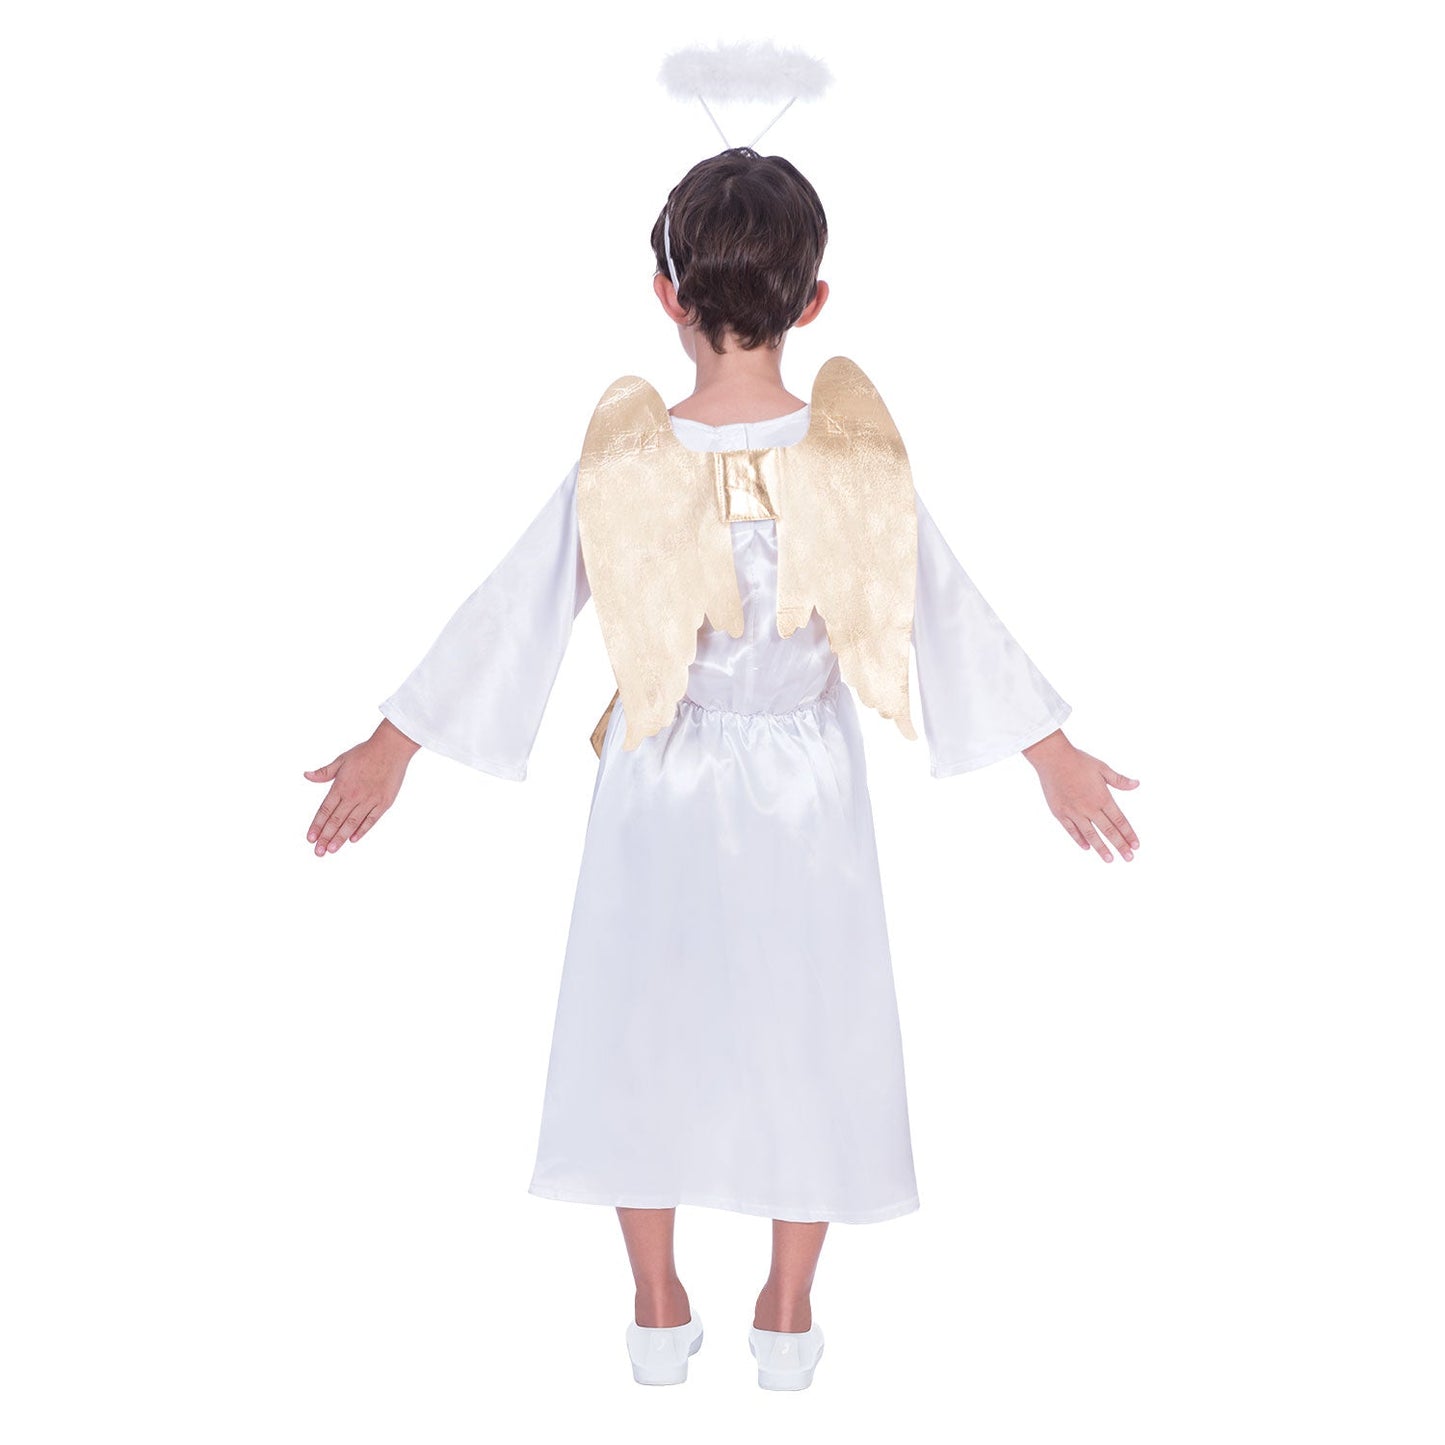 Child Nativity Gabriel Angel Costume includes tunic with gold bow belt| wings and halo